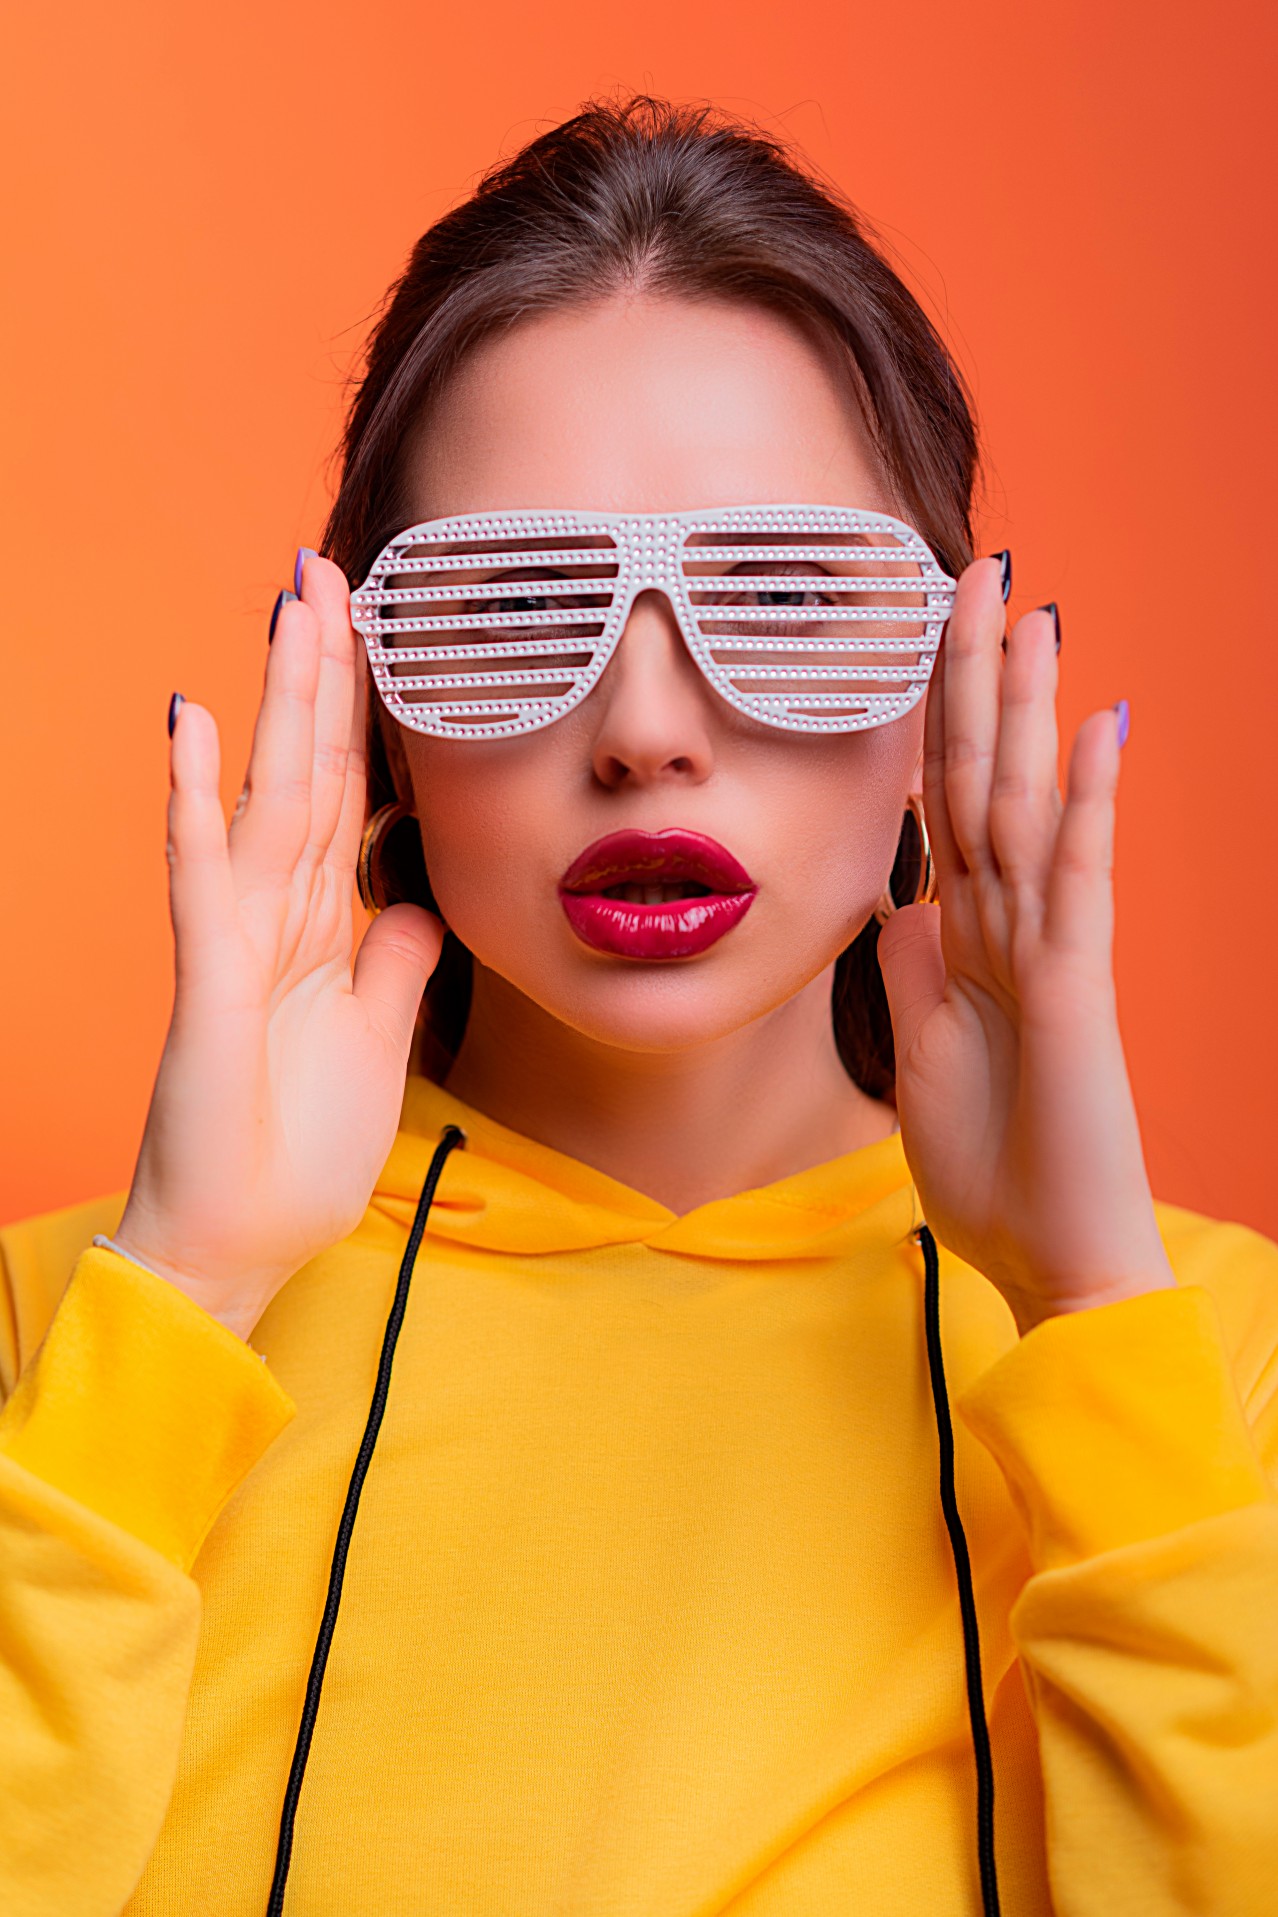 Young Woman with Red Lips on an Orange Background